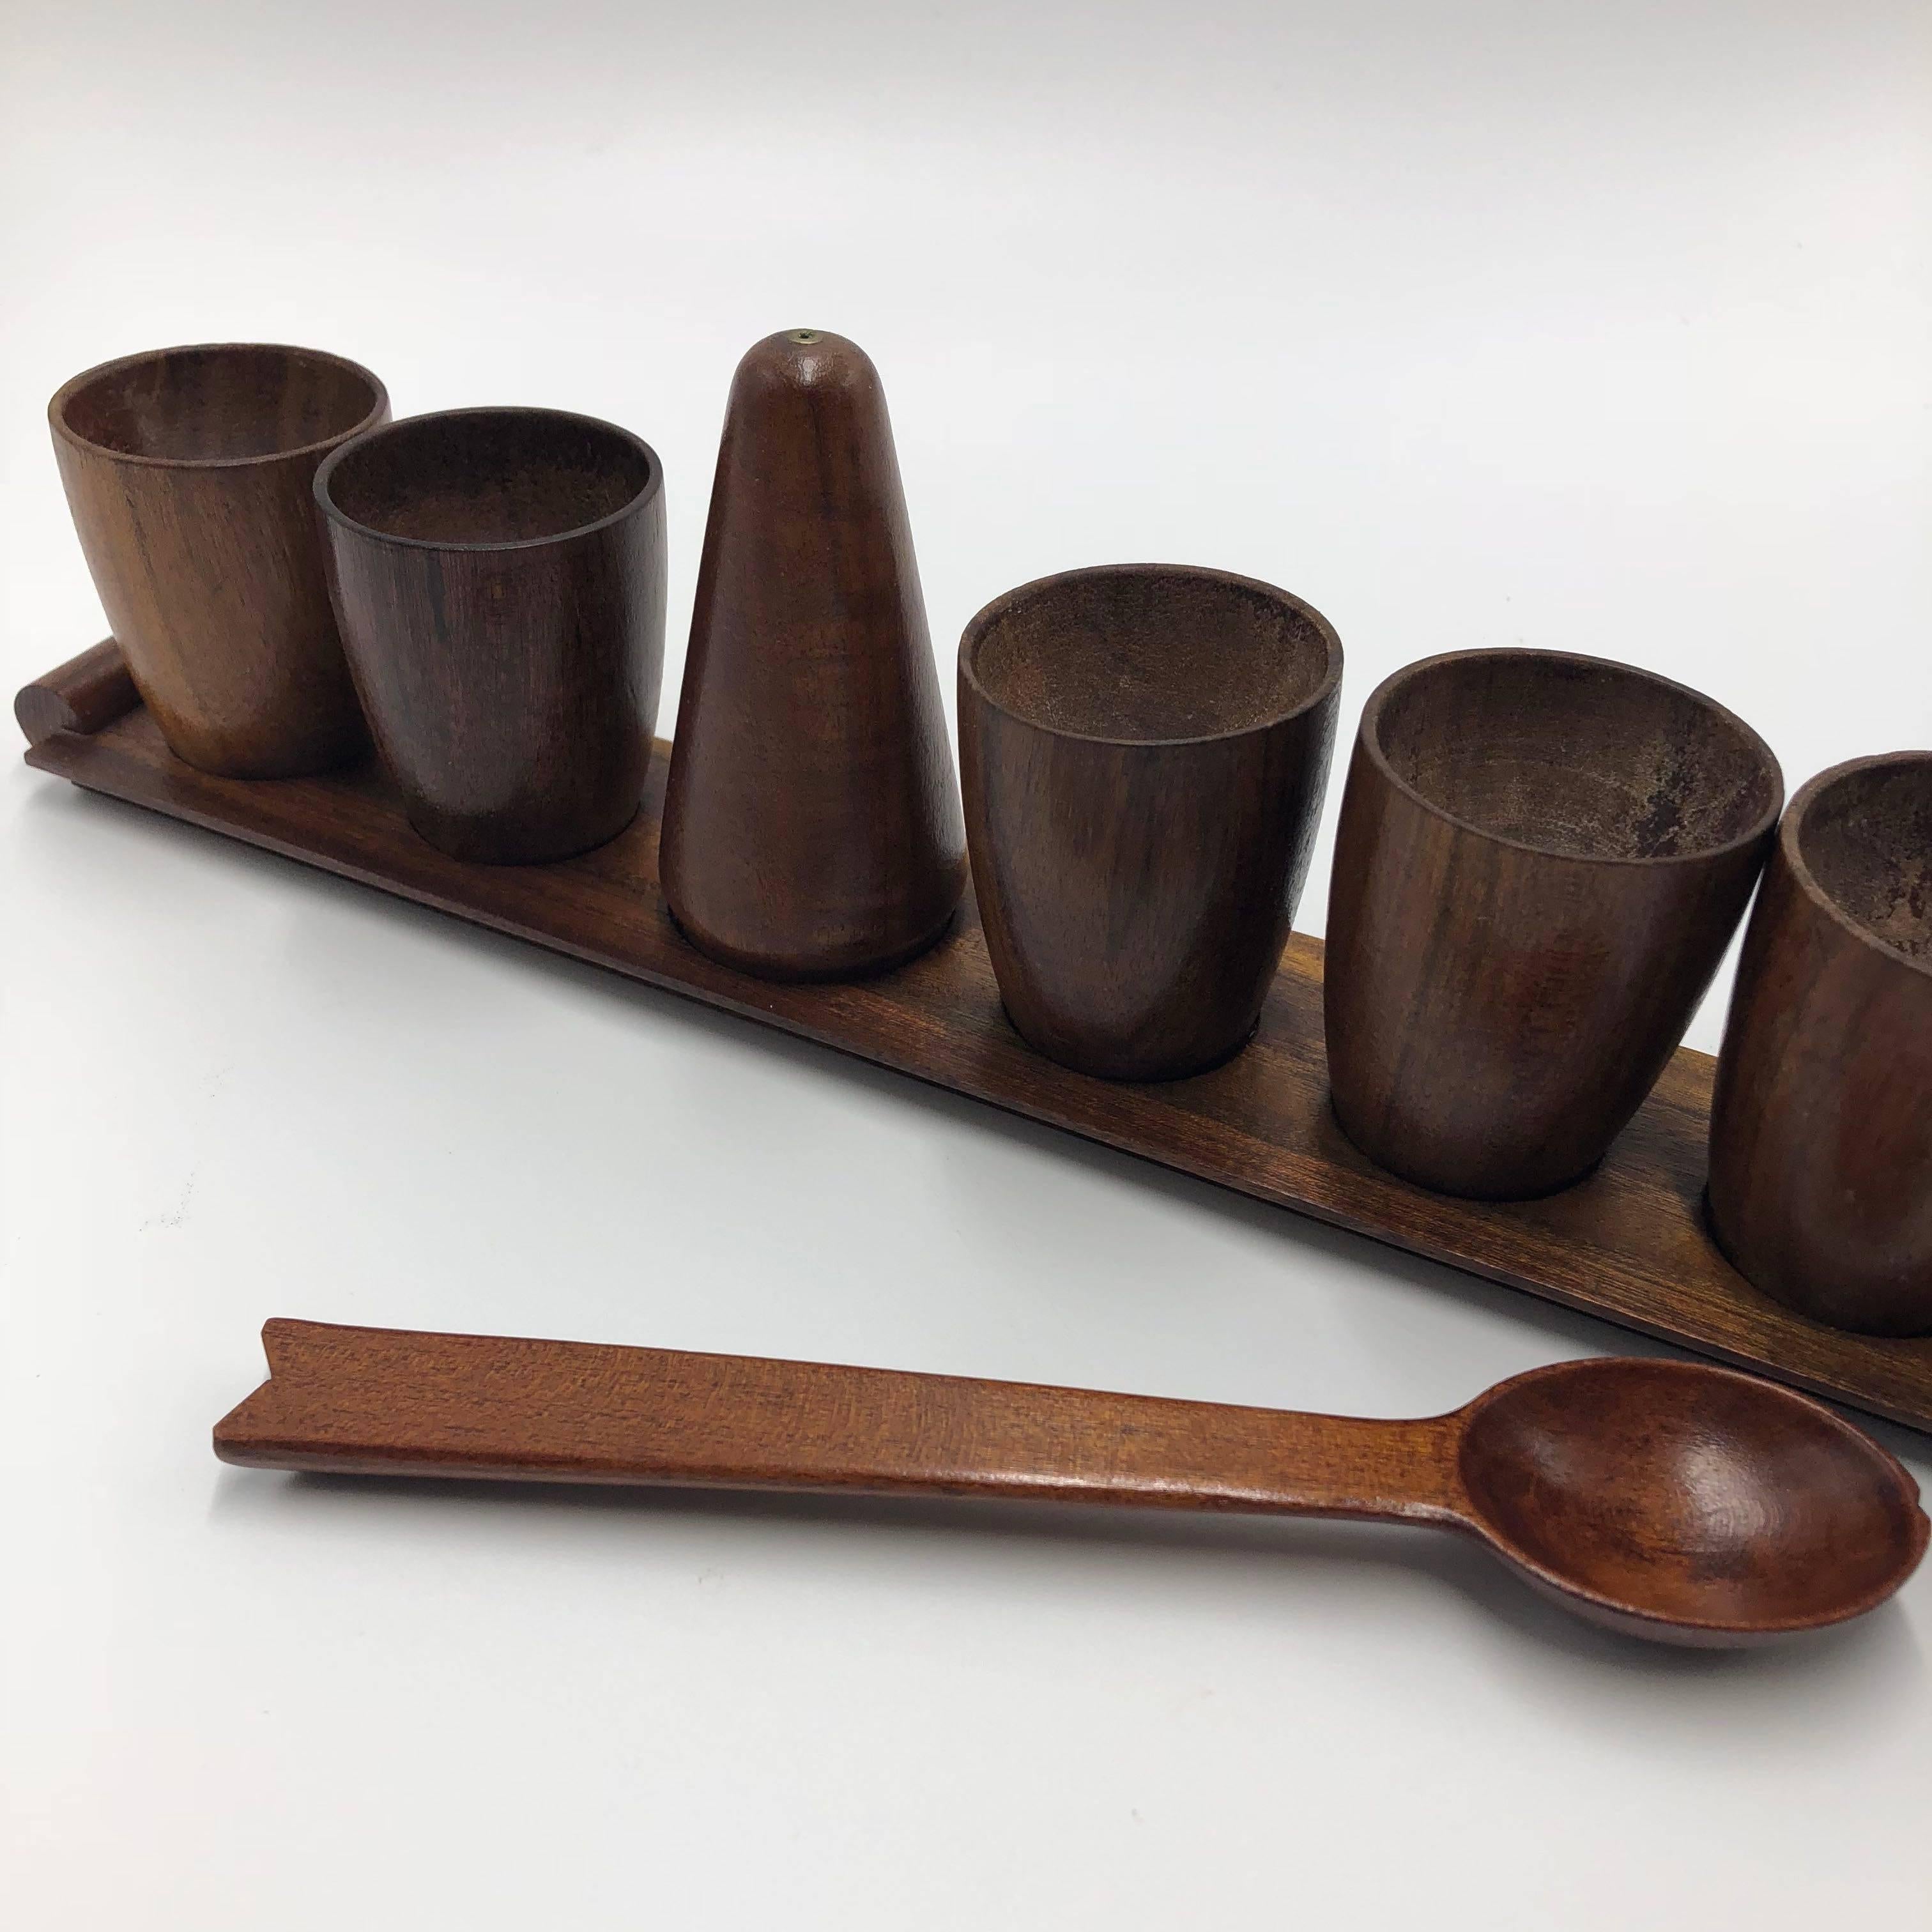 Beautiful set of six egg cups, salt shaker, spoon and tray.
The set was made in the 1960s in the Netherlands 

Measurements (cm) :
Tray 32 x 5 cm
Spoon 16.5 cm
Saltshaker 8 cm x 3,5 cm
Egg cups H 5 x W 4 cm.



           